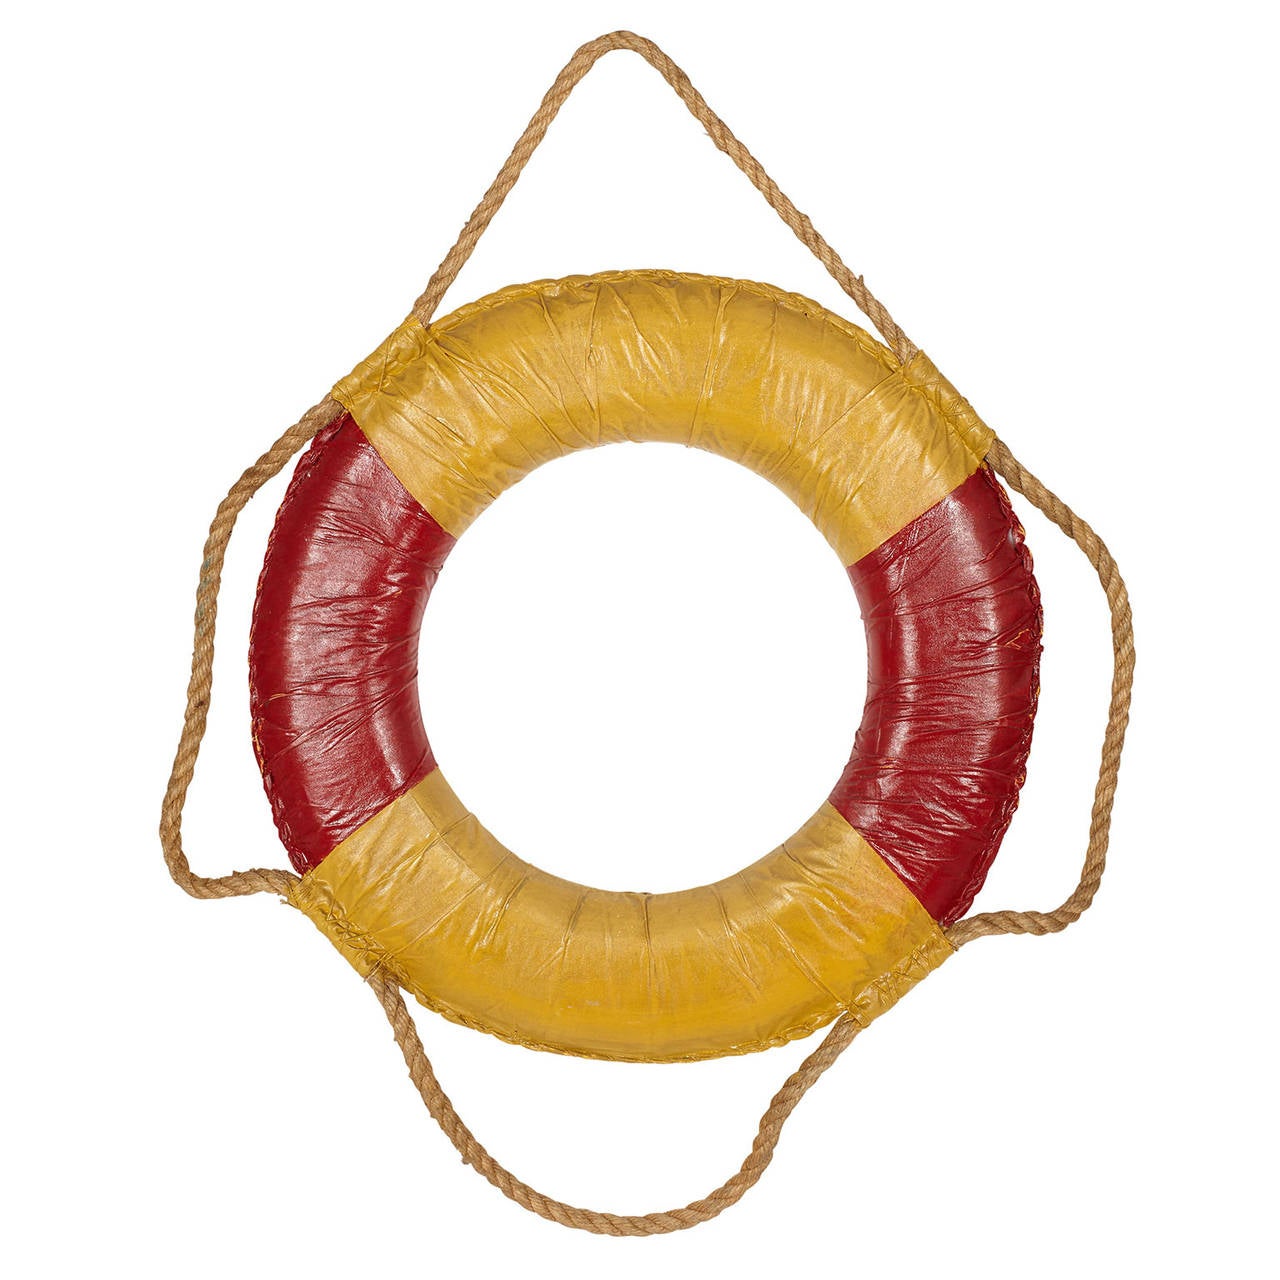 Vintage life preserver from the 